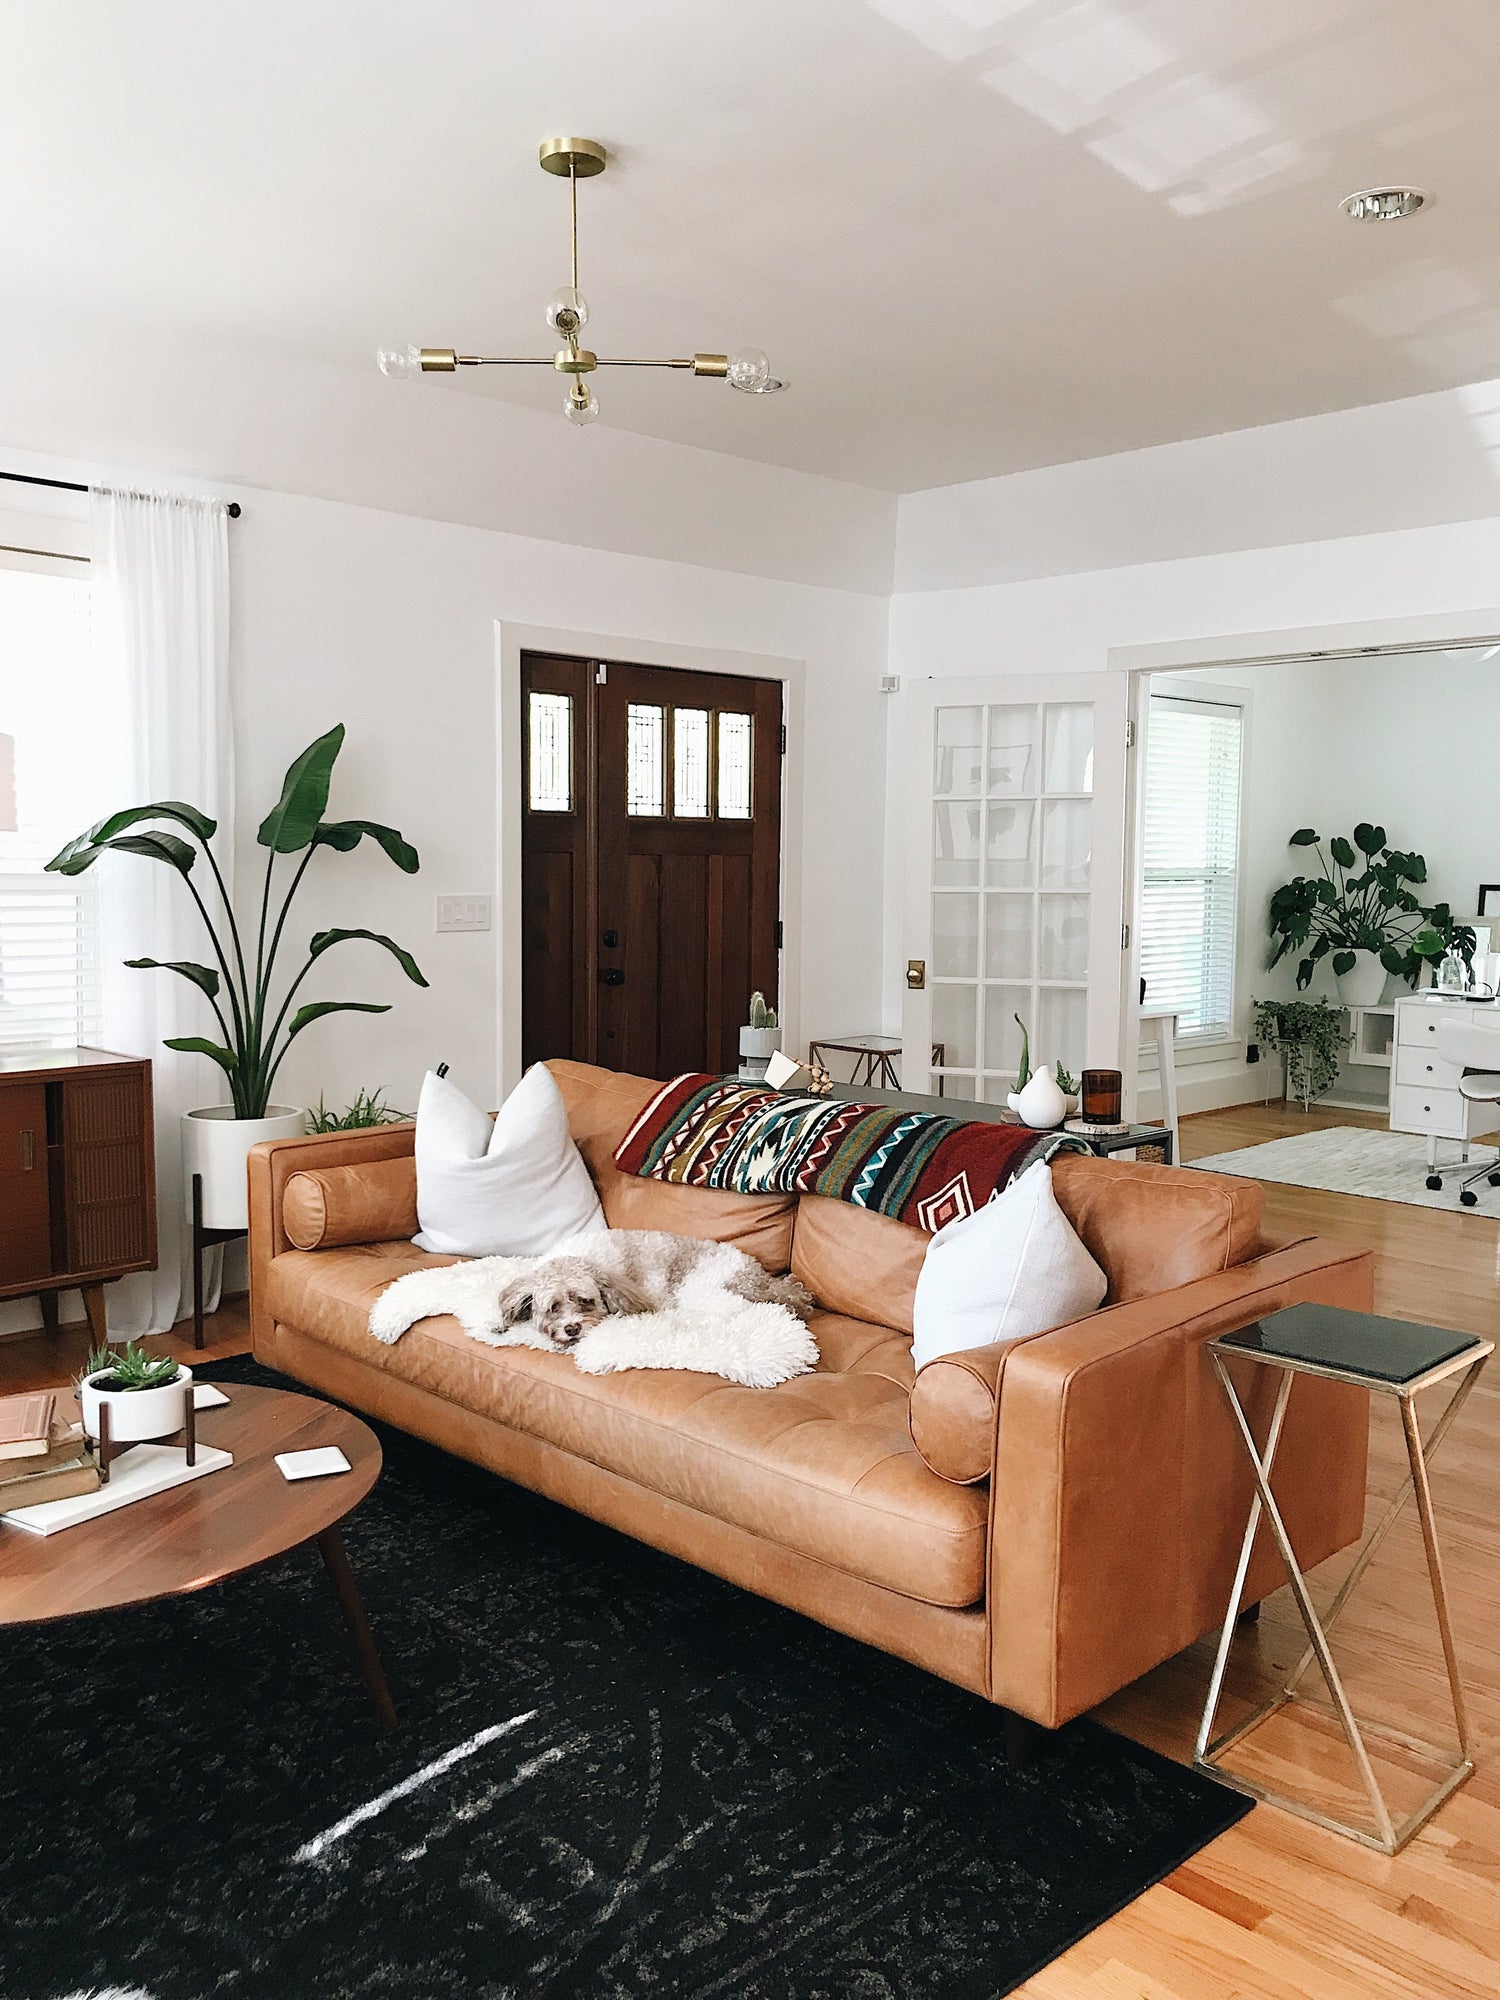 A cozy living room with a tan leather couch adorned with white and patterned pillows. A fluffy dog is lying on the couch. The room is decorated with plants, a round wooden coffee table, a black rug, and a modern light fixture. The space has white walls and wooden accents.